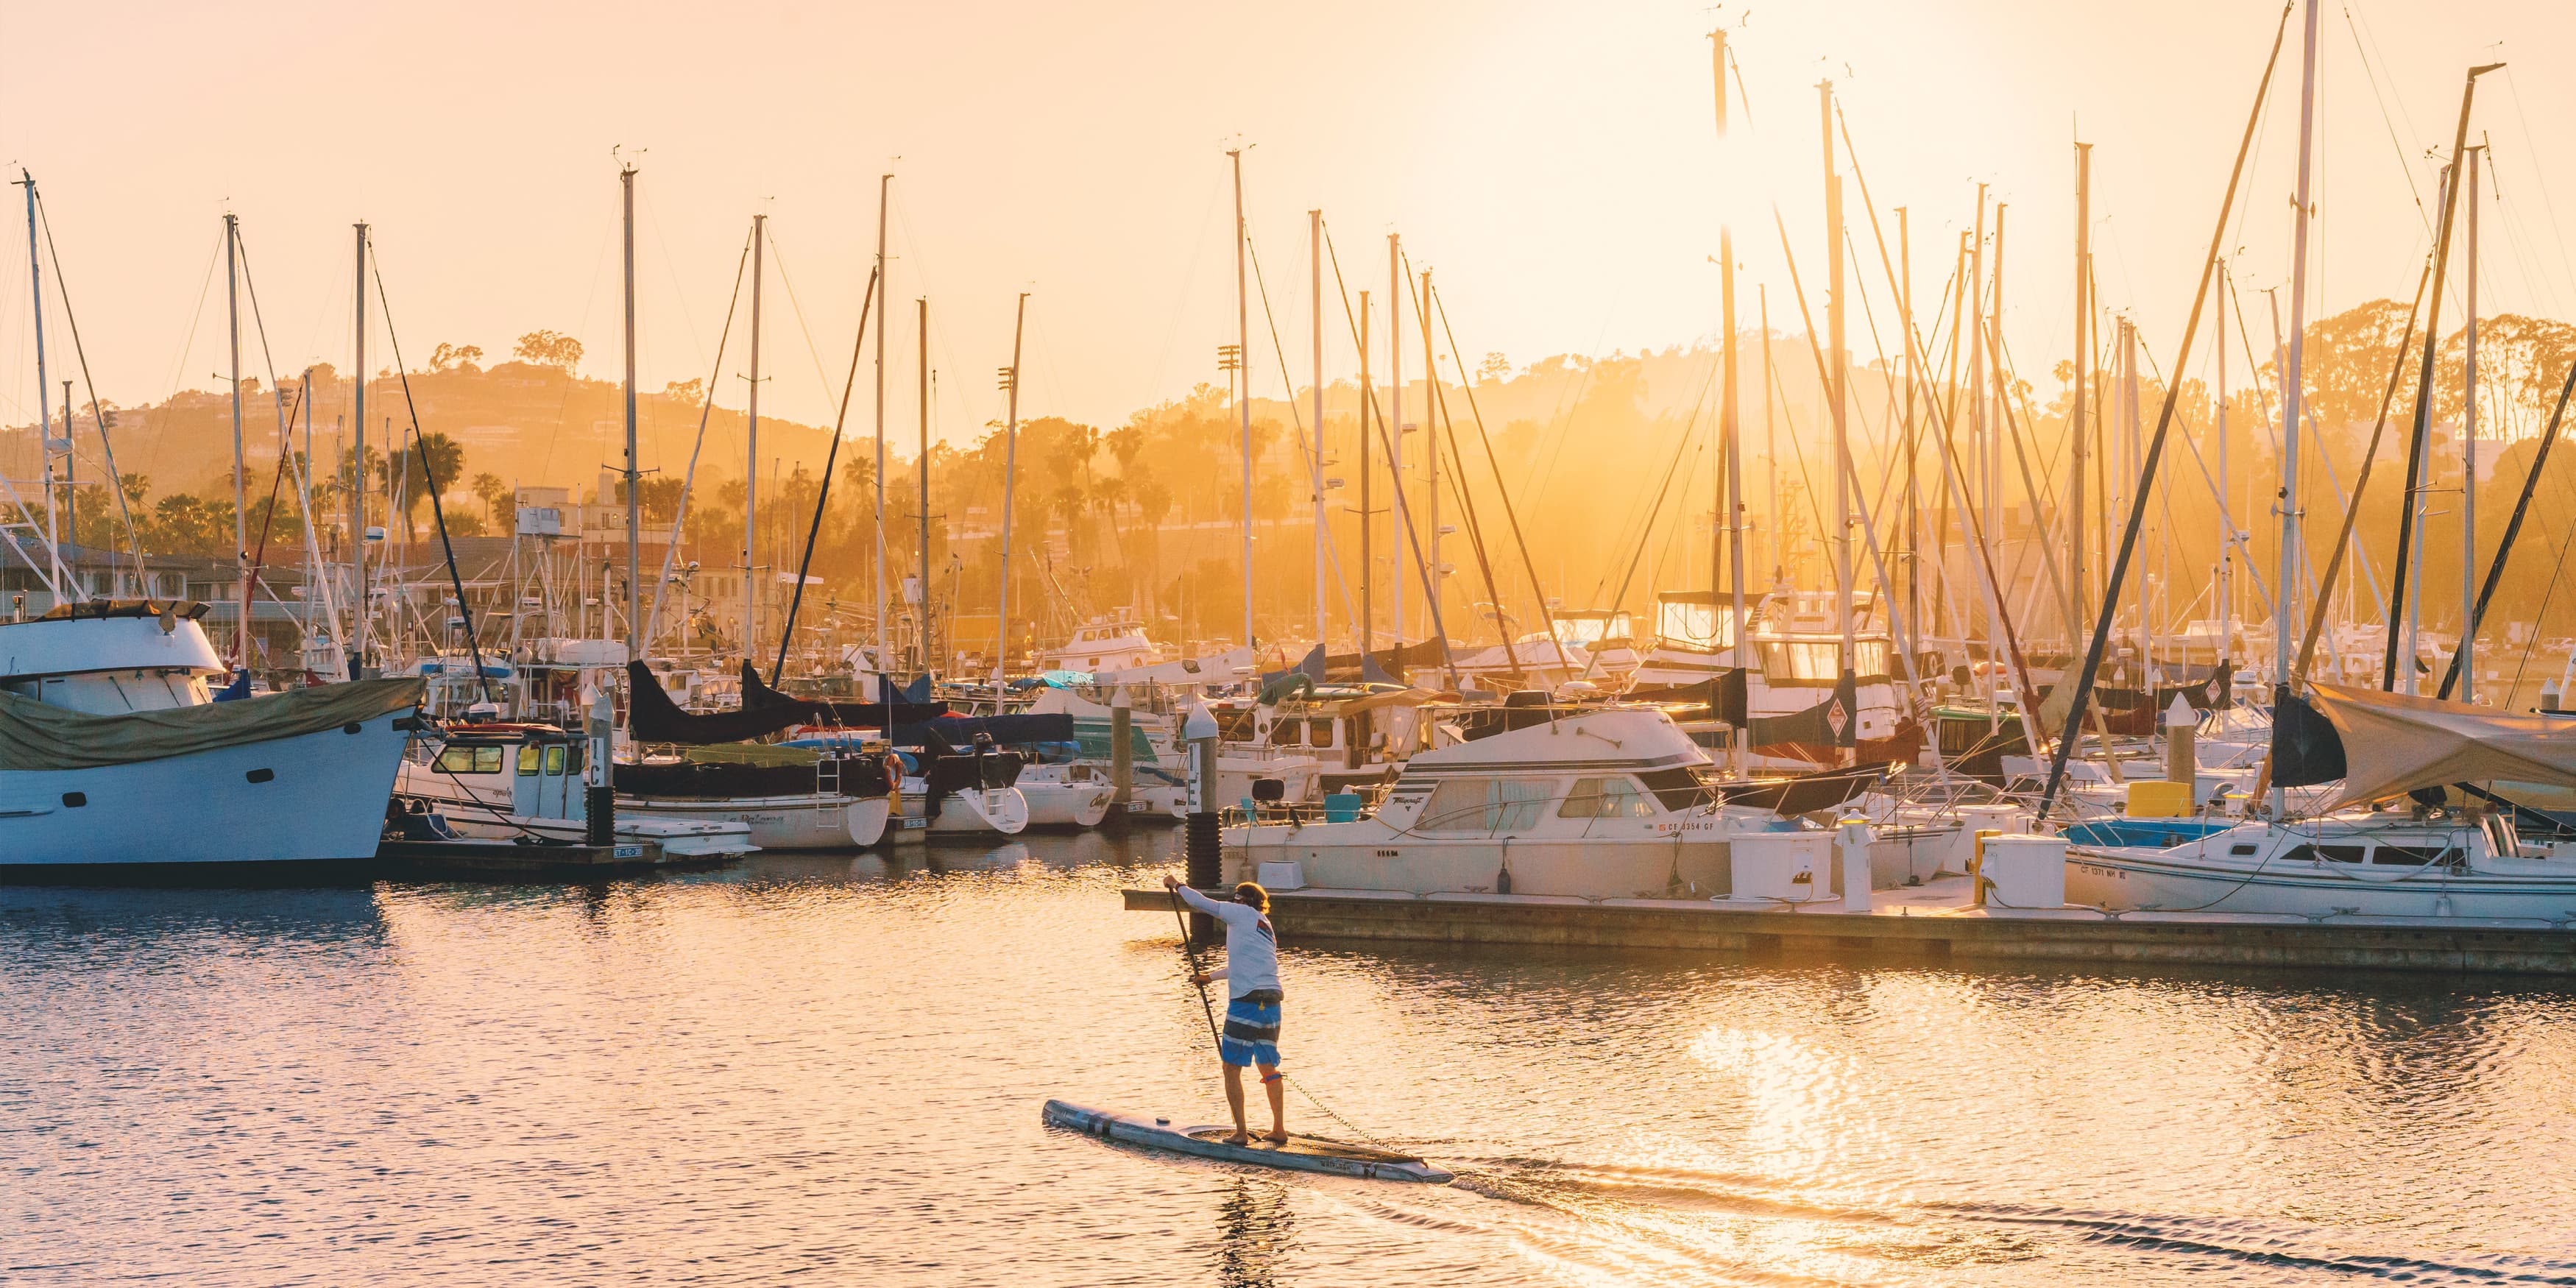 The City of Dana Point, man paddle-boards at sunset in the Dana Point Harbor